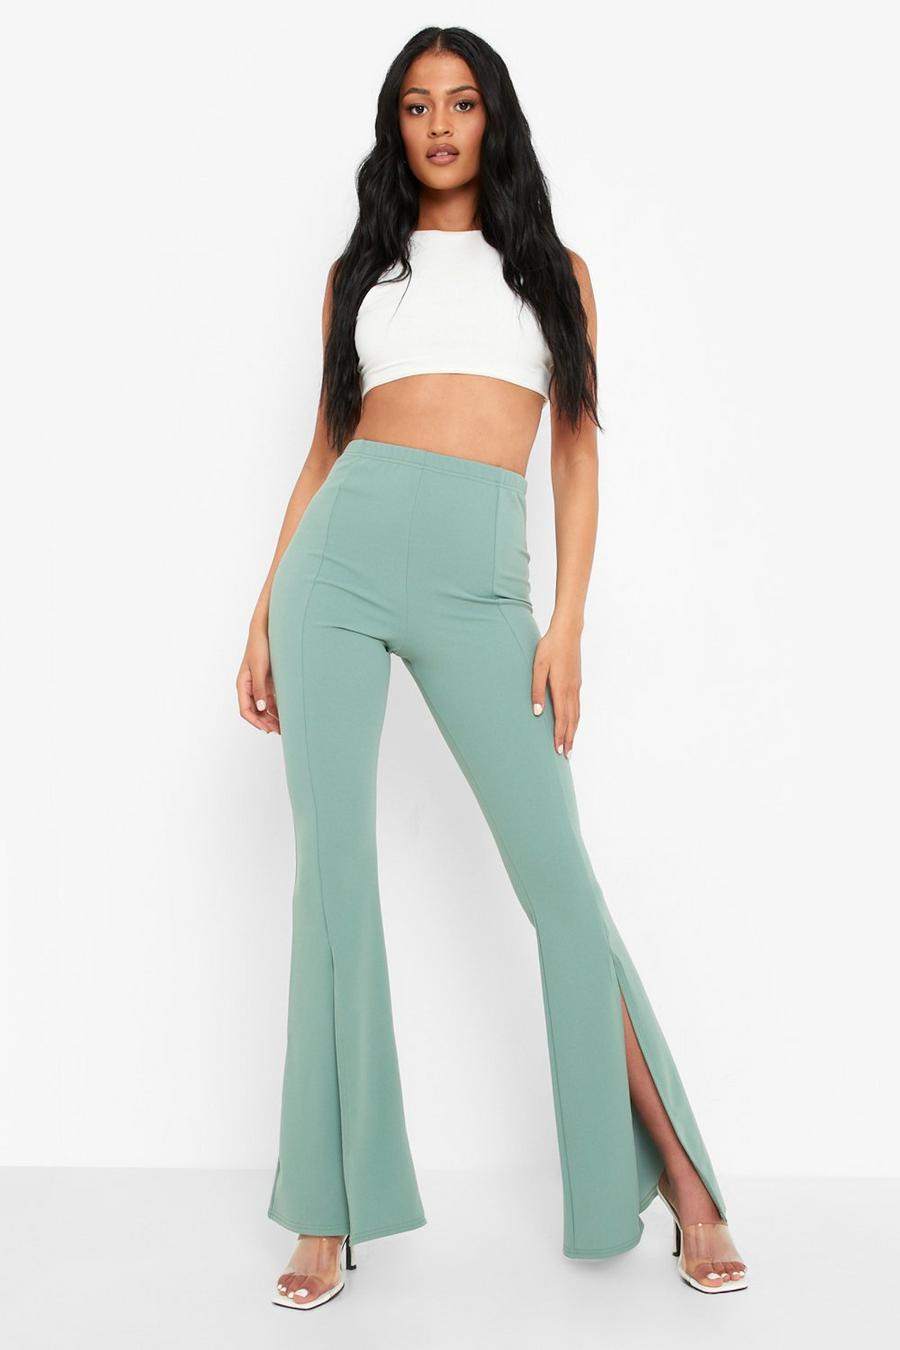 4th + Reckless Tall exclusive kick flare pants in sage green